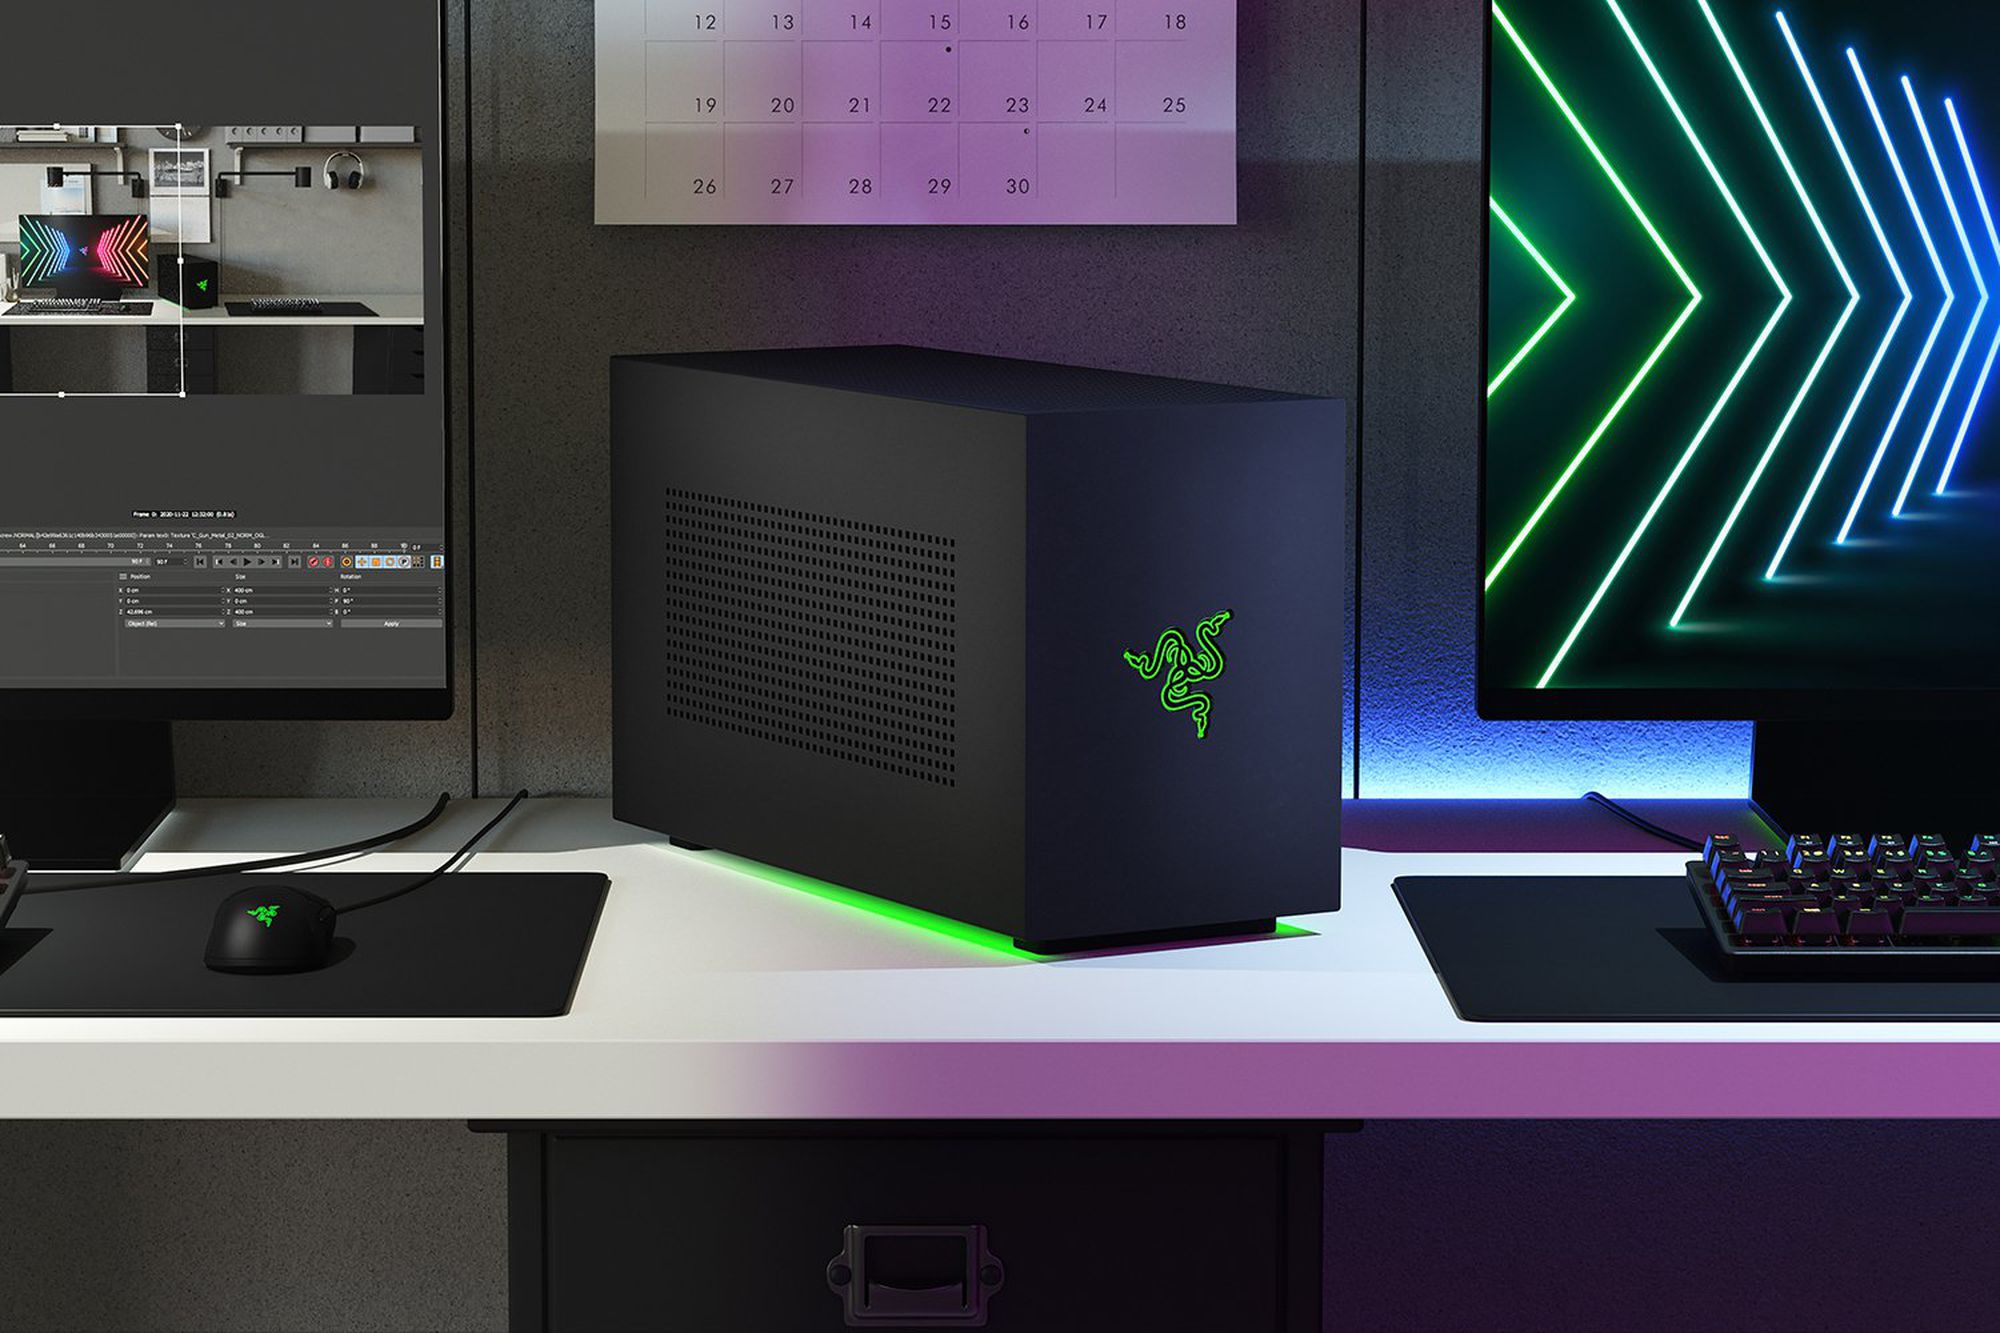 Due Furnace Patriotisk Razer's Tomahawk modular gaming PC is finally a real product - The Verge